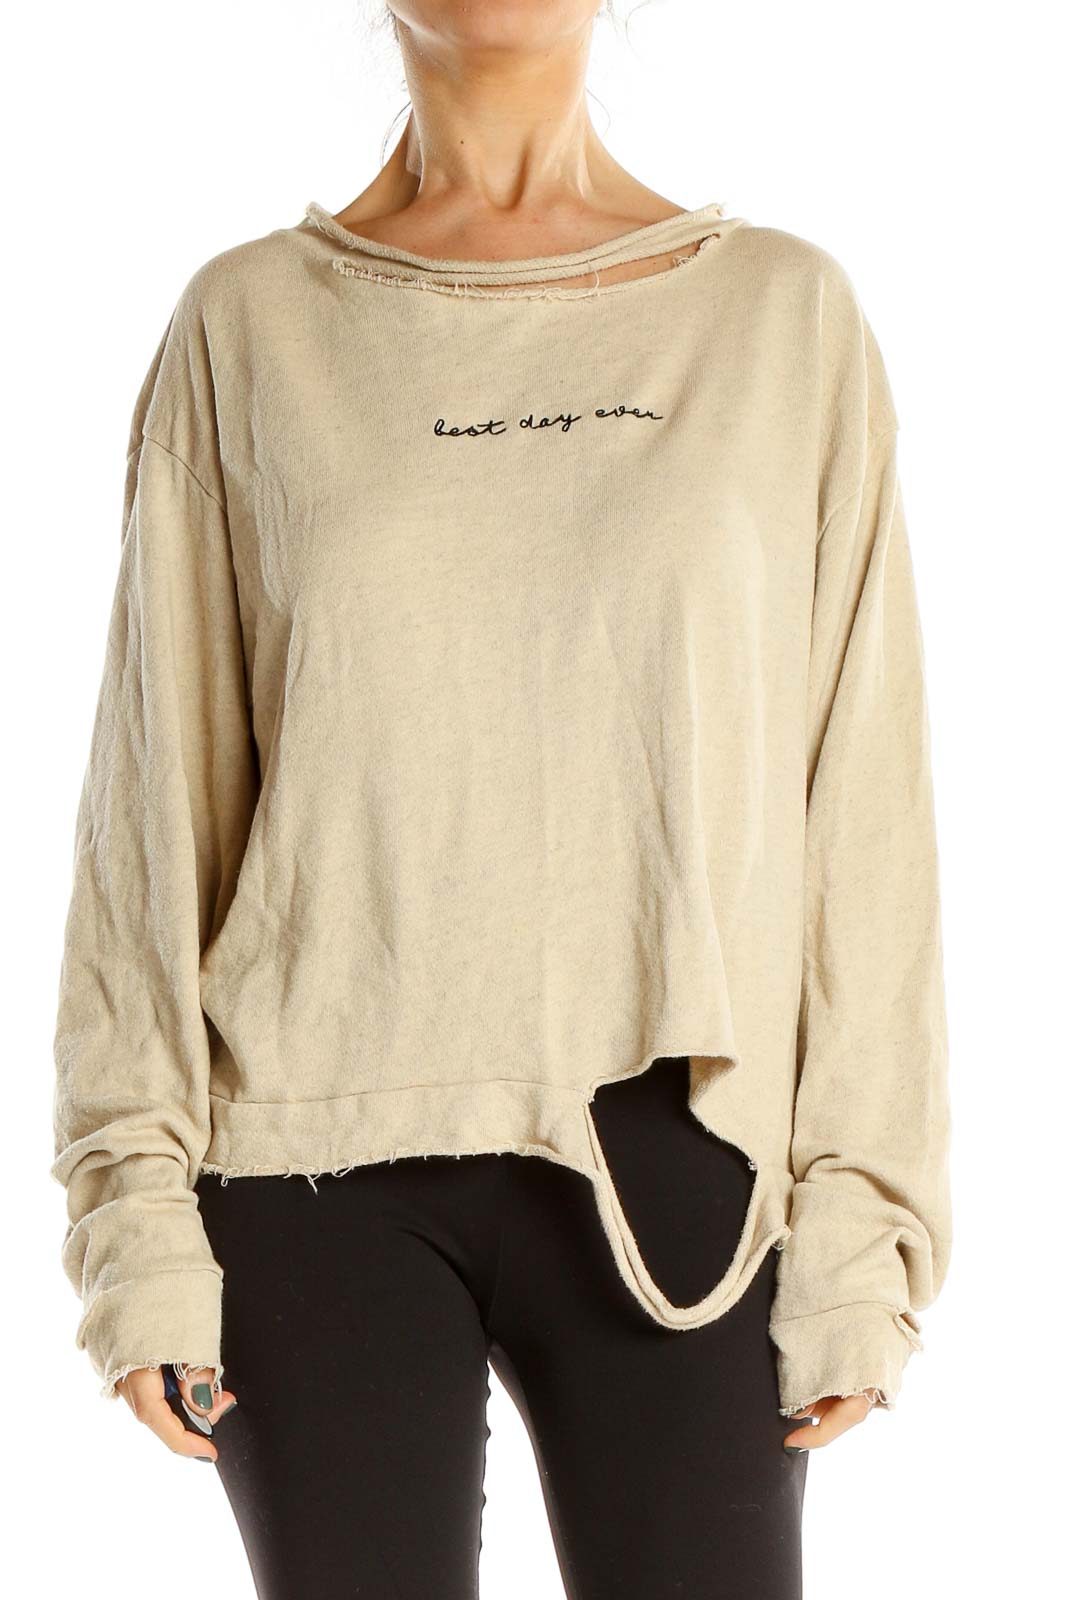 Beige Graphic Print Distressed Top Front